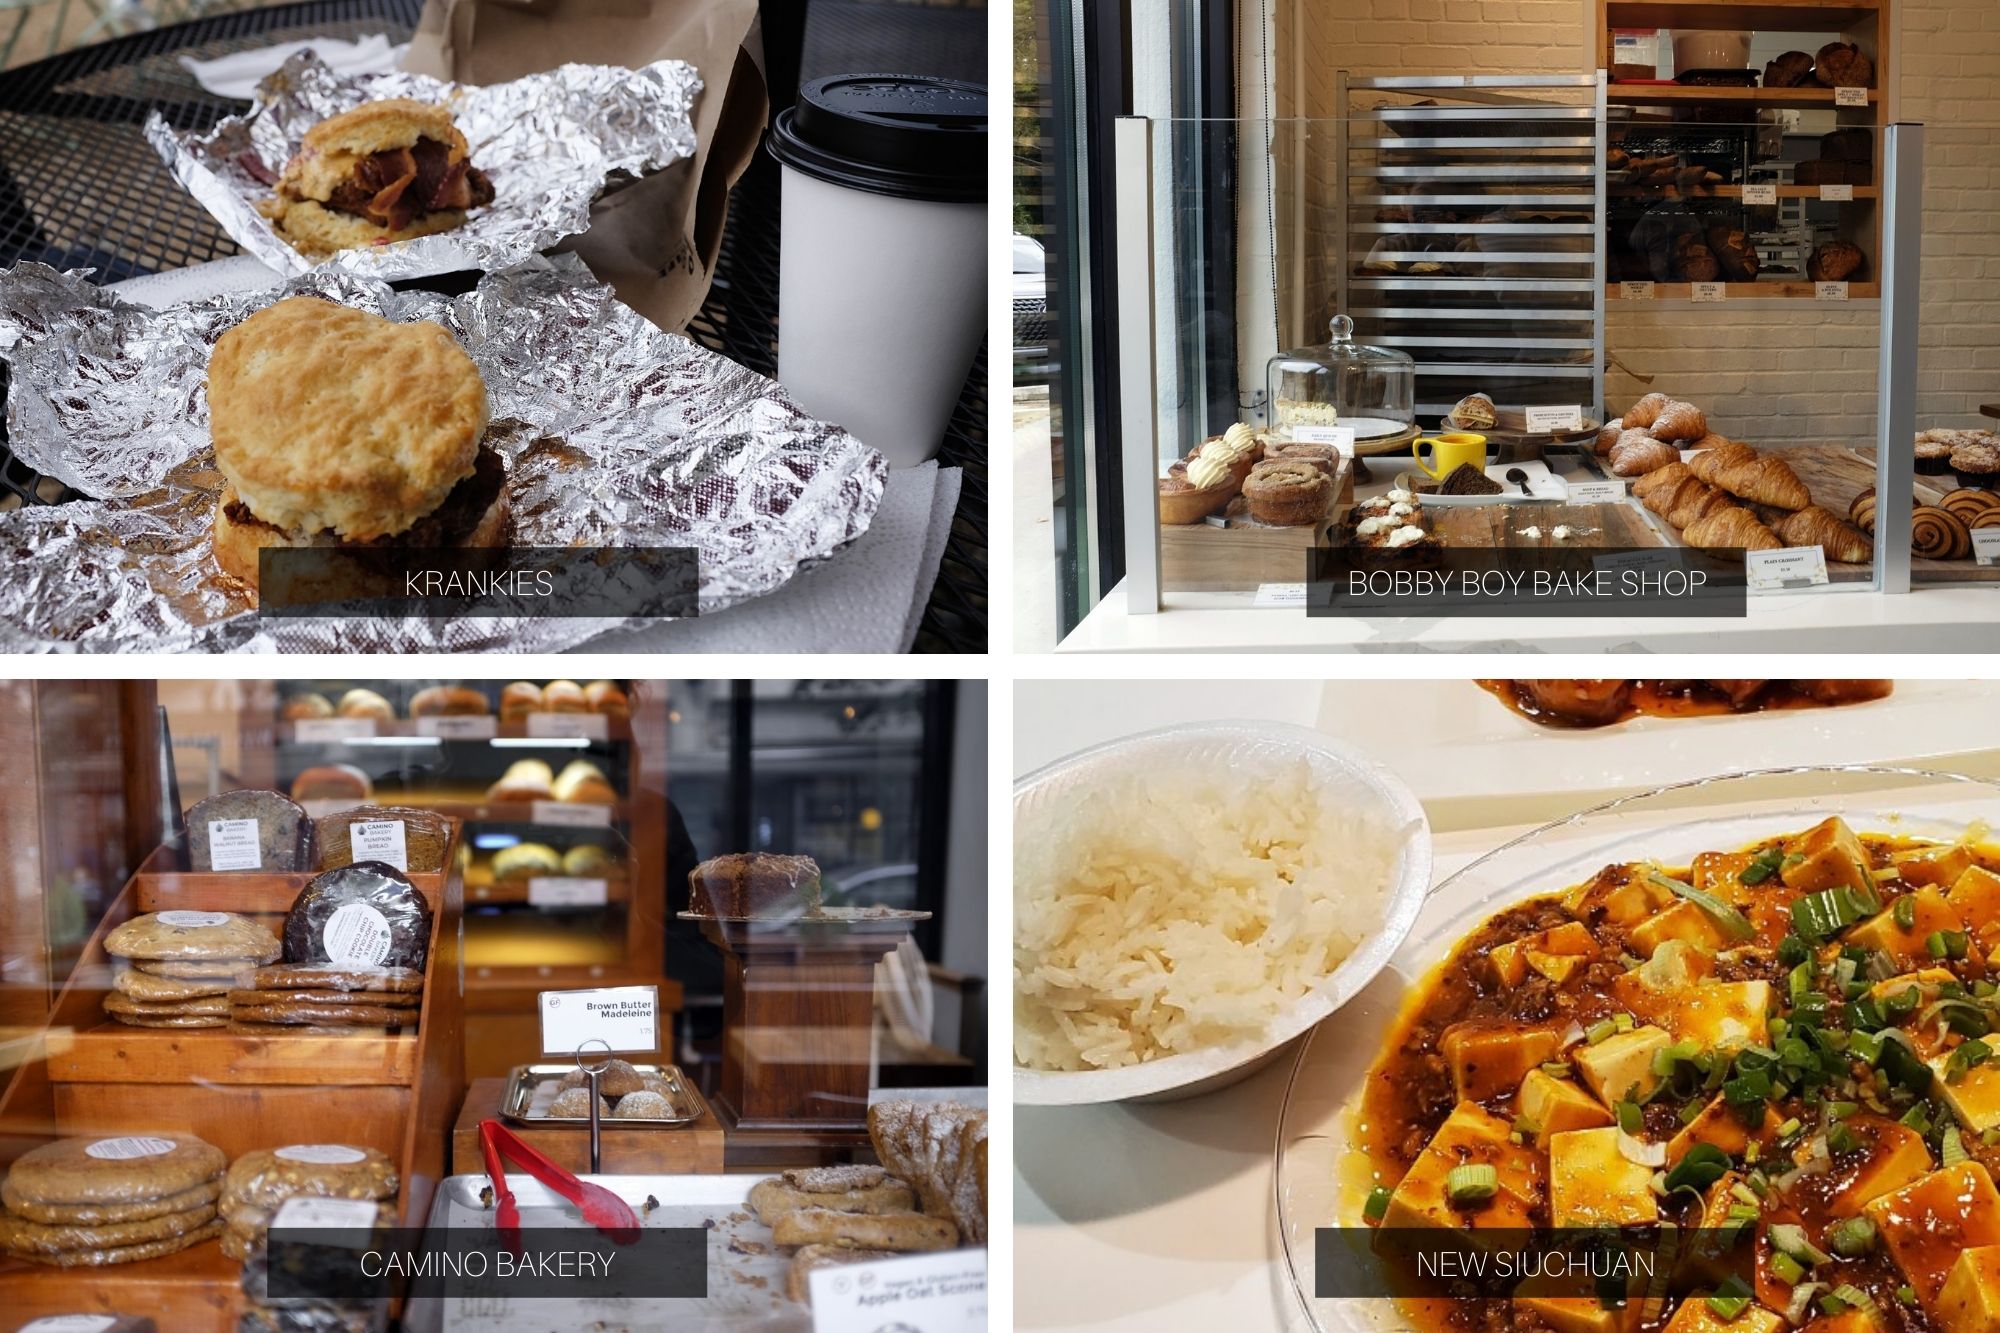 Collage of Food in Winston-Salem: Chicken biscuits at Krankies, Pastries at Bobby Boy Bake Shop, Treats and Sweets from Camino Bakery, and Ma Po Tofu from New Siuchuan